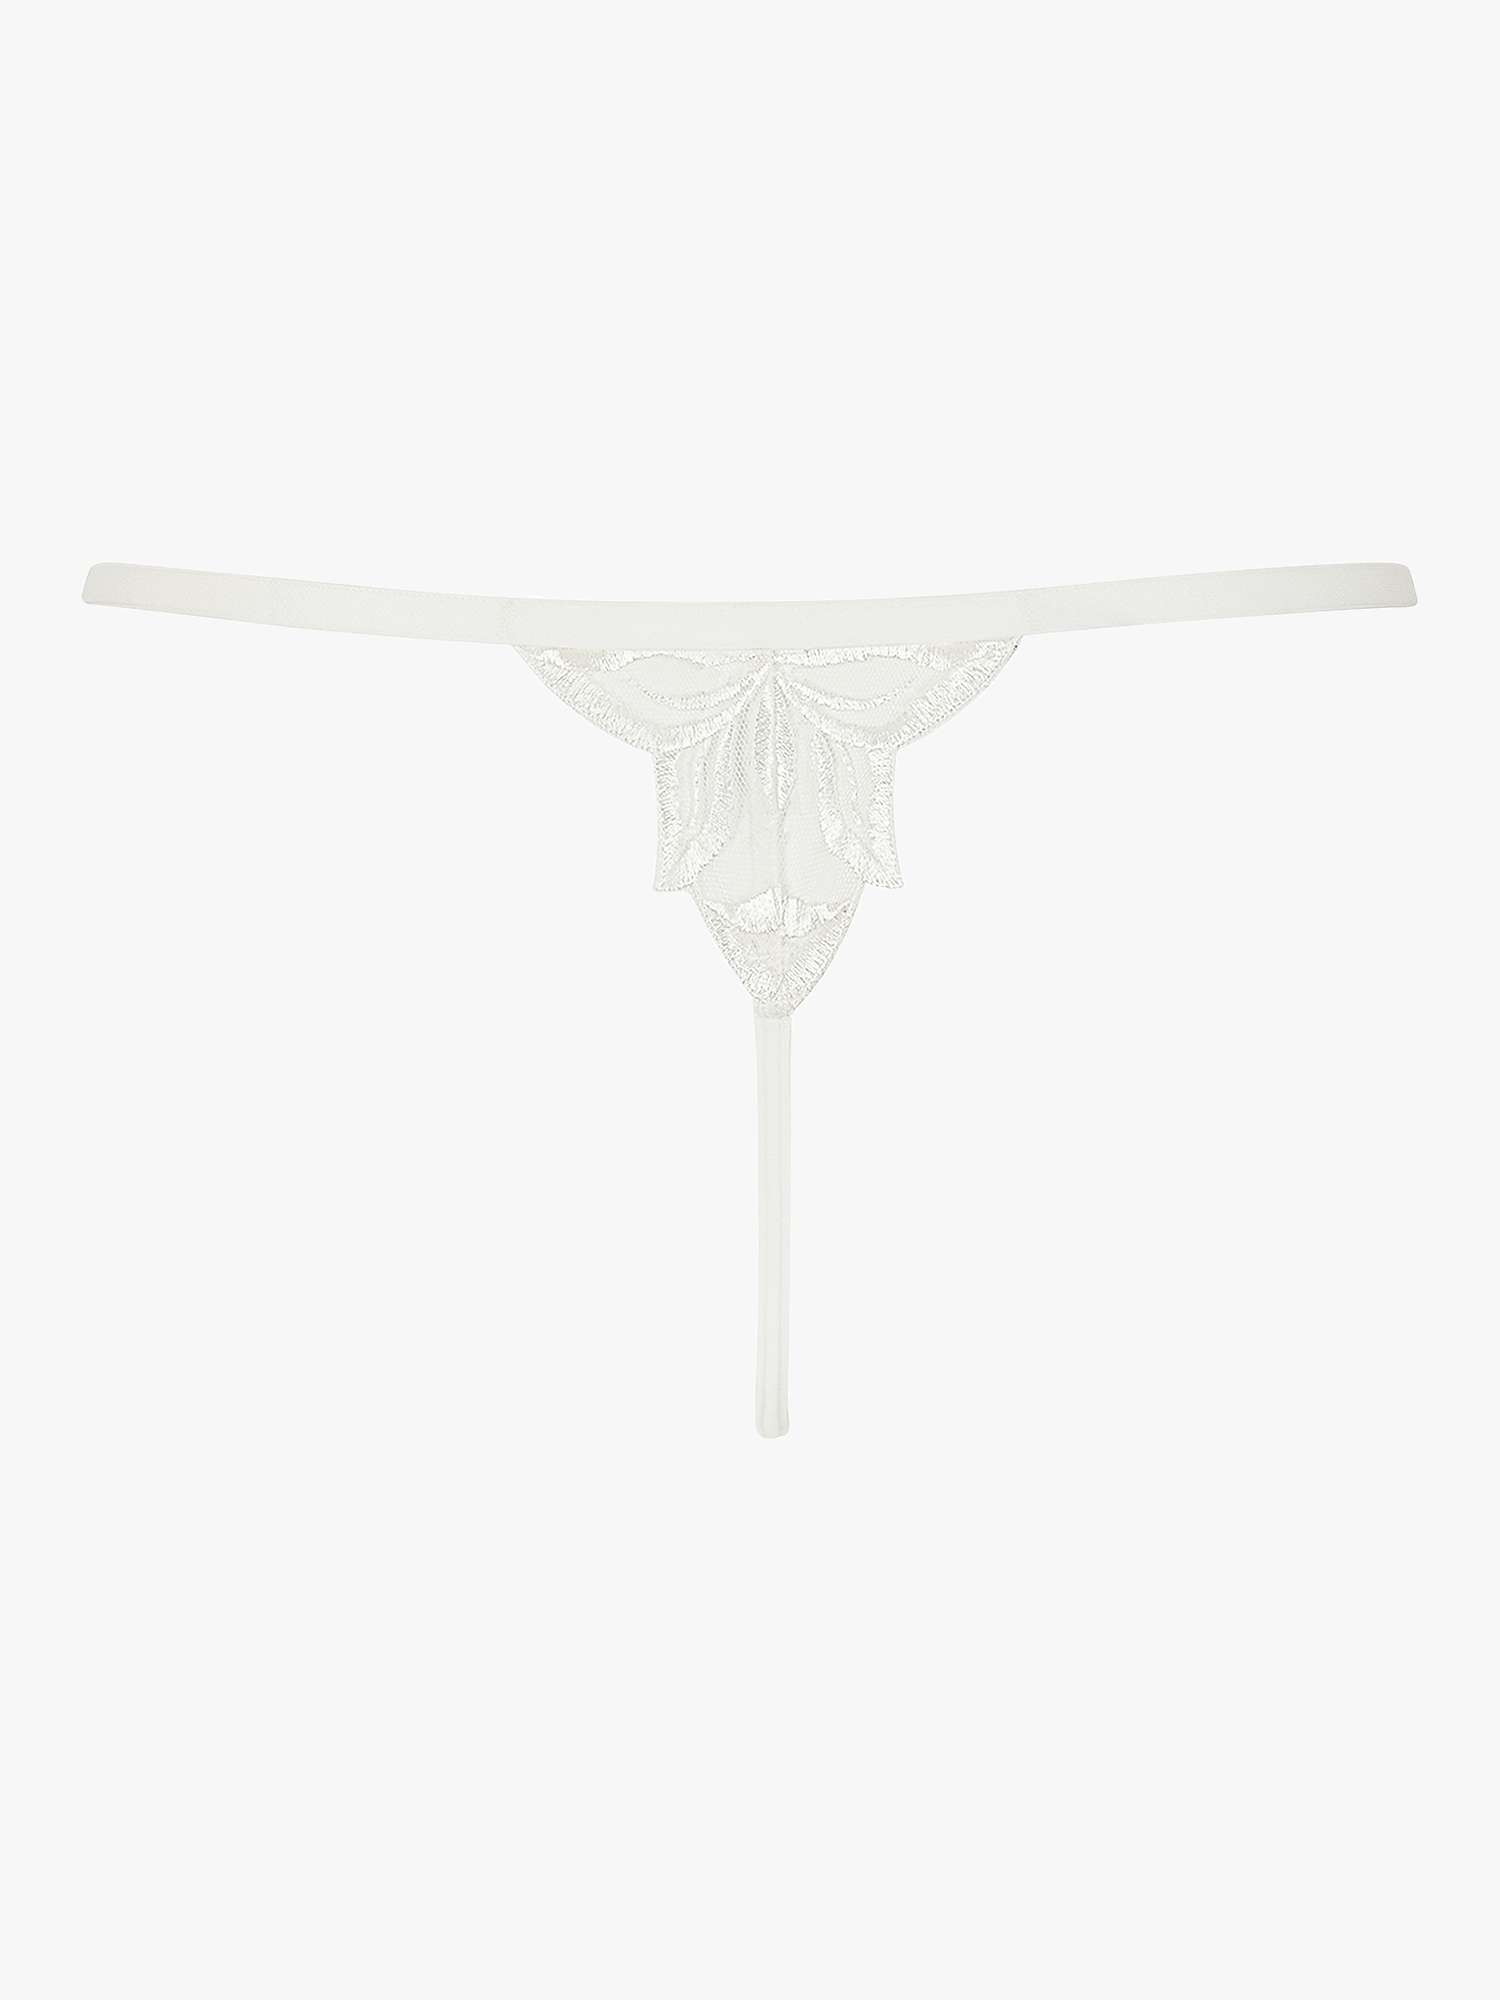 Buy Bluebella Isadora Leaf Embroidery Thong, White Online at johnlewis.com